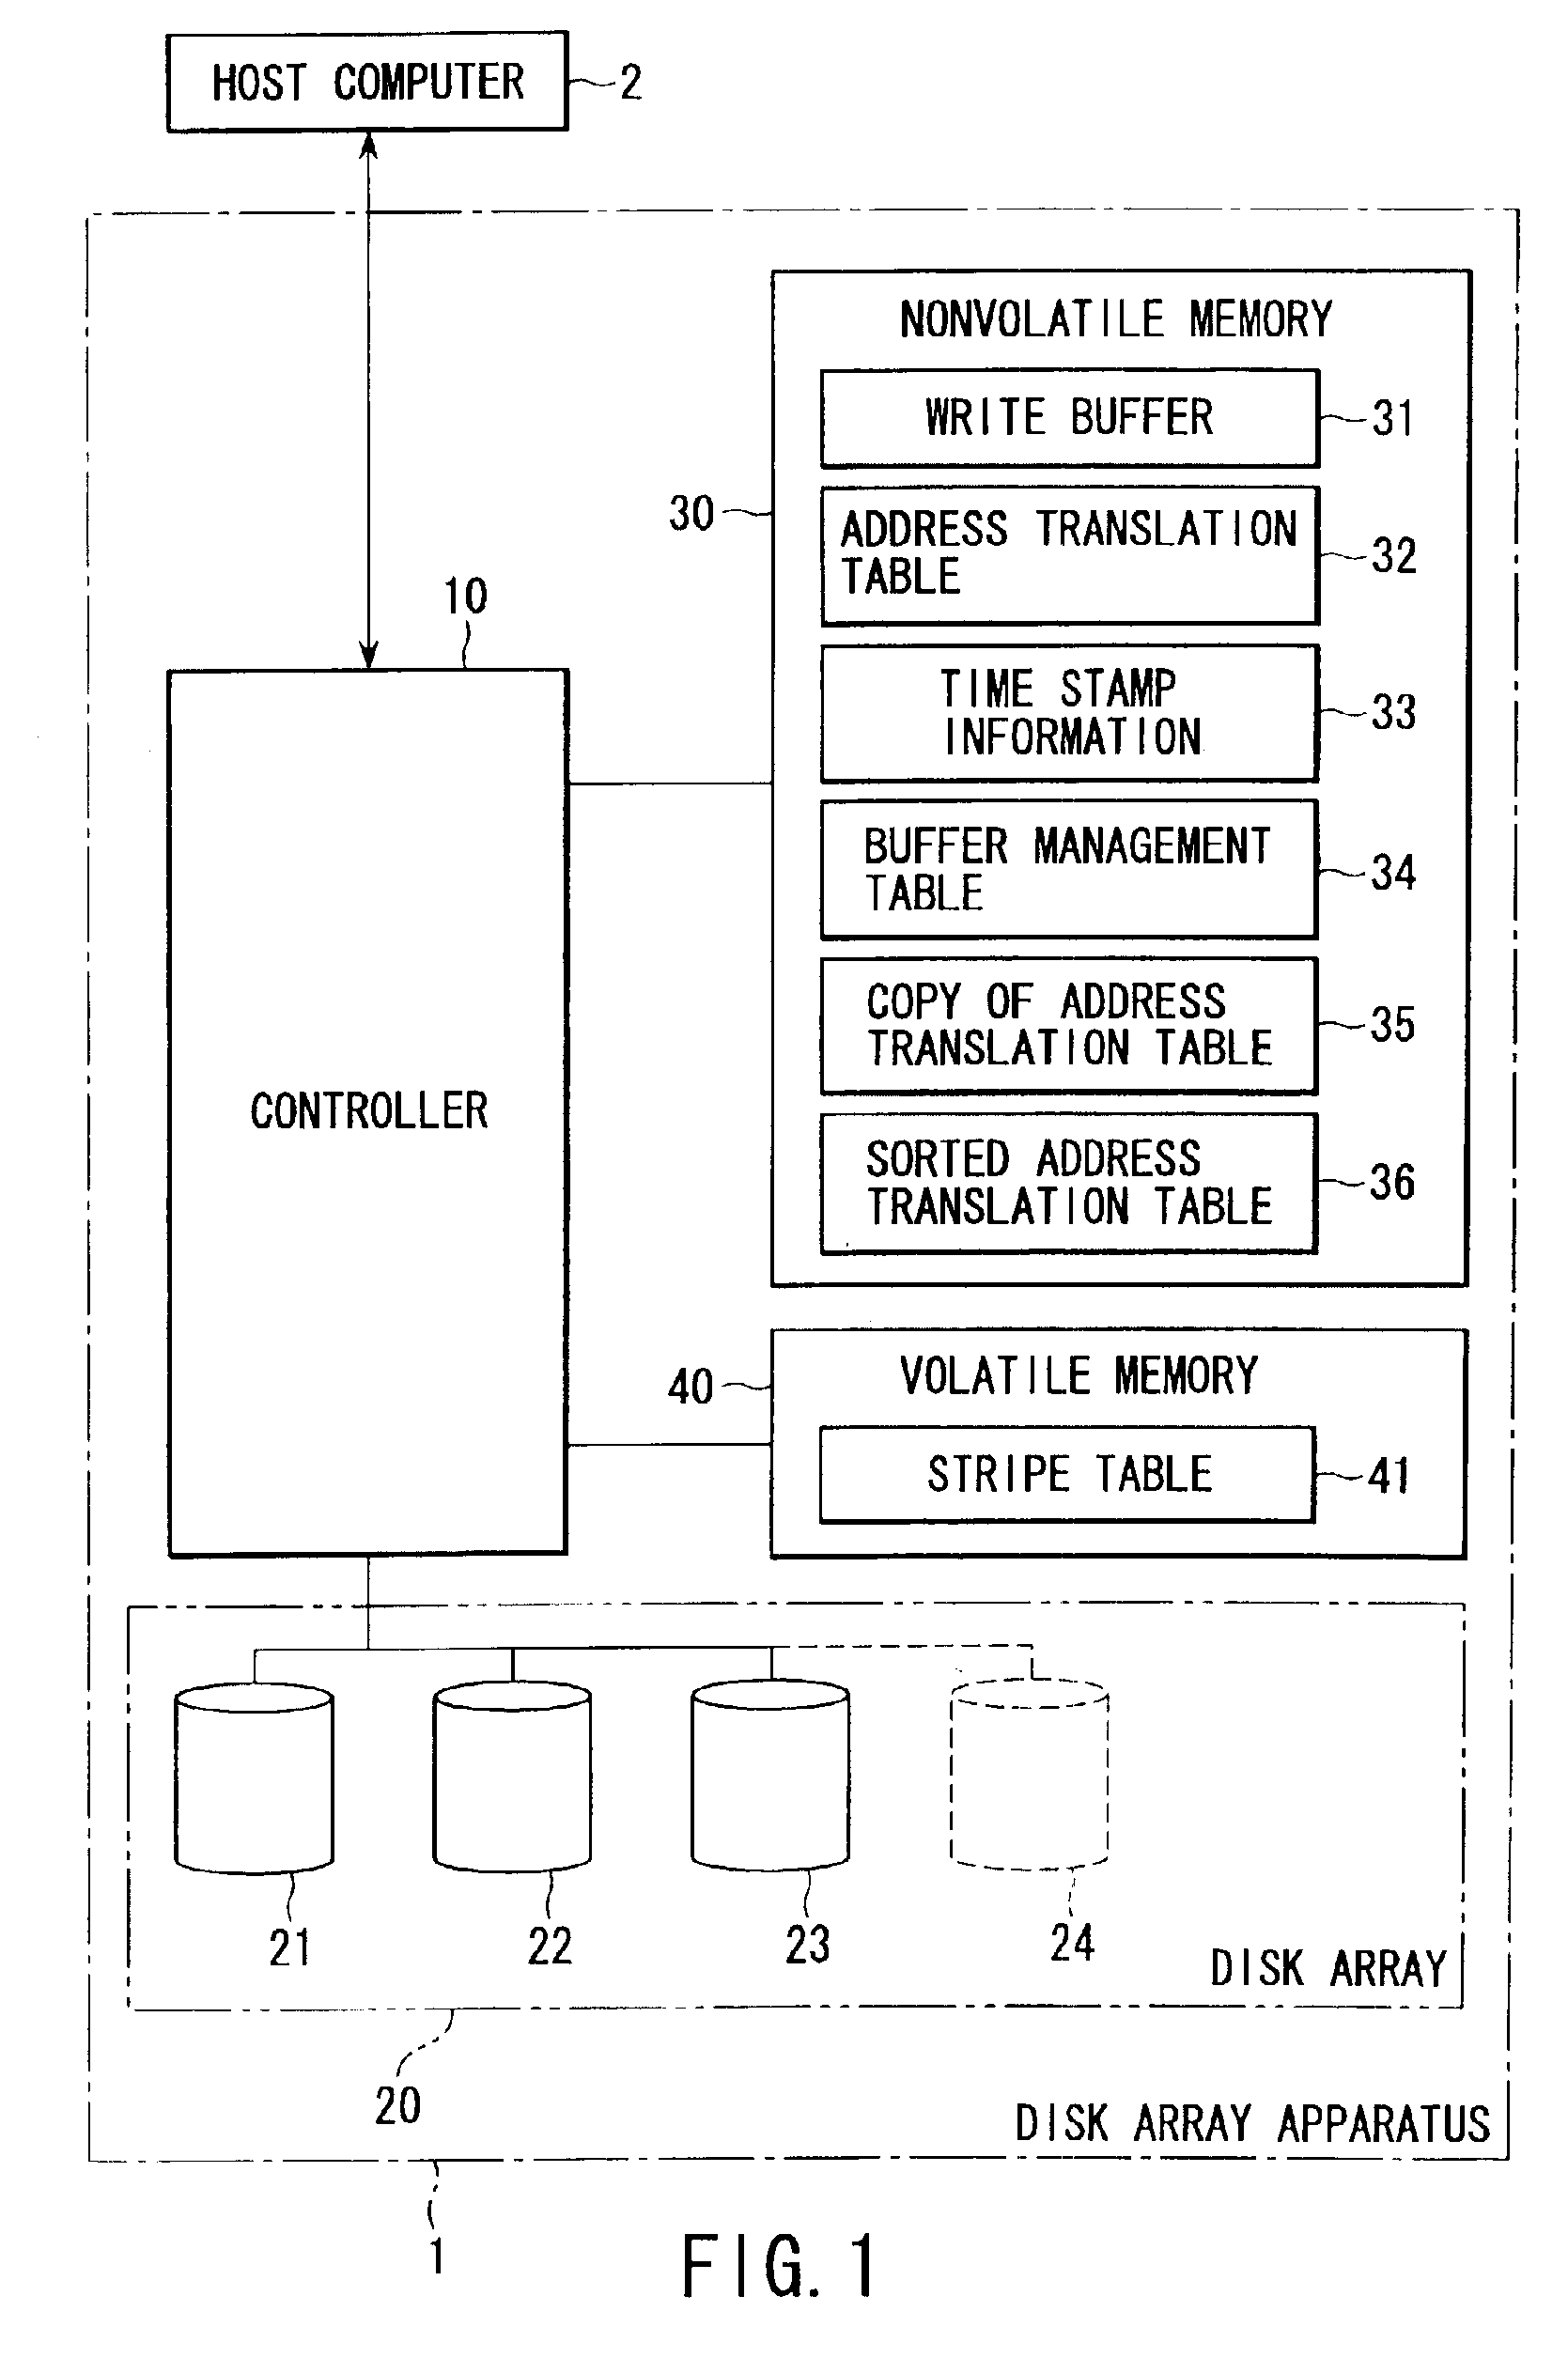 Disk array apparatus for and method of expanding storage capacity dynamically